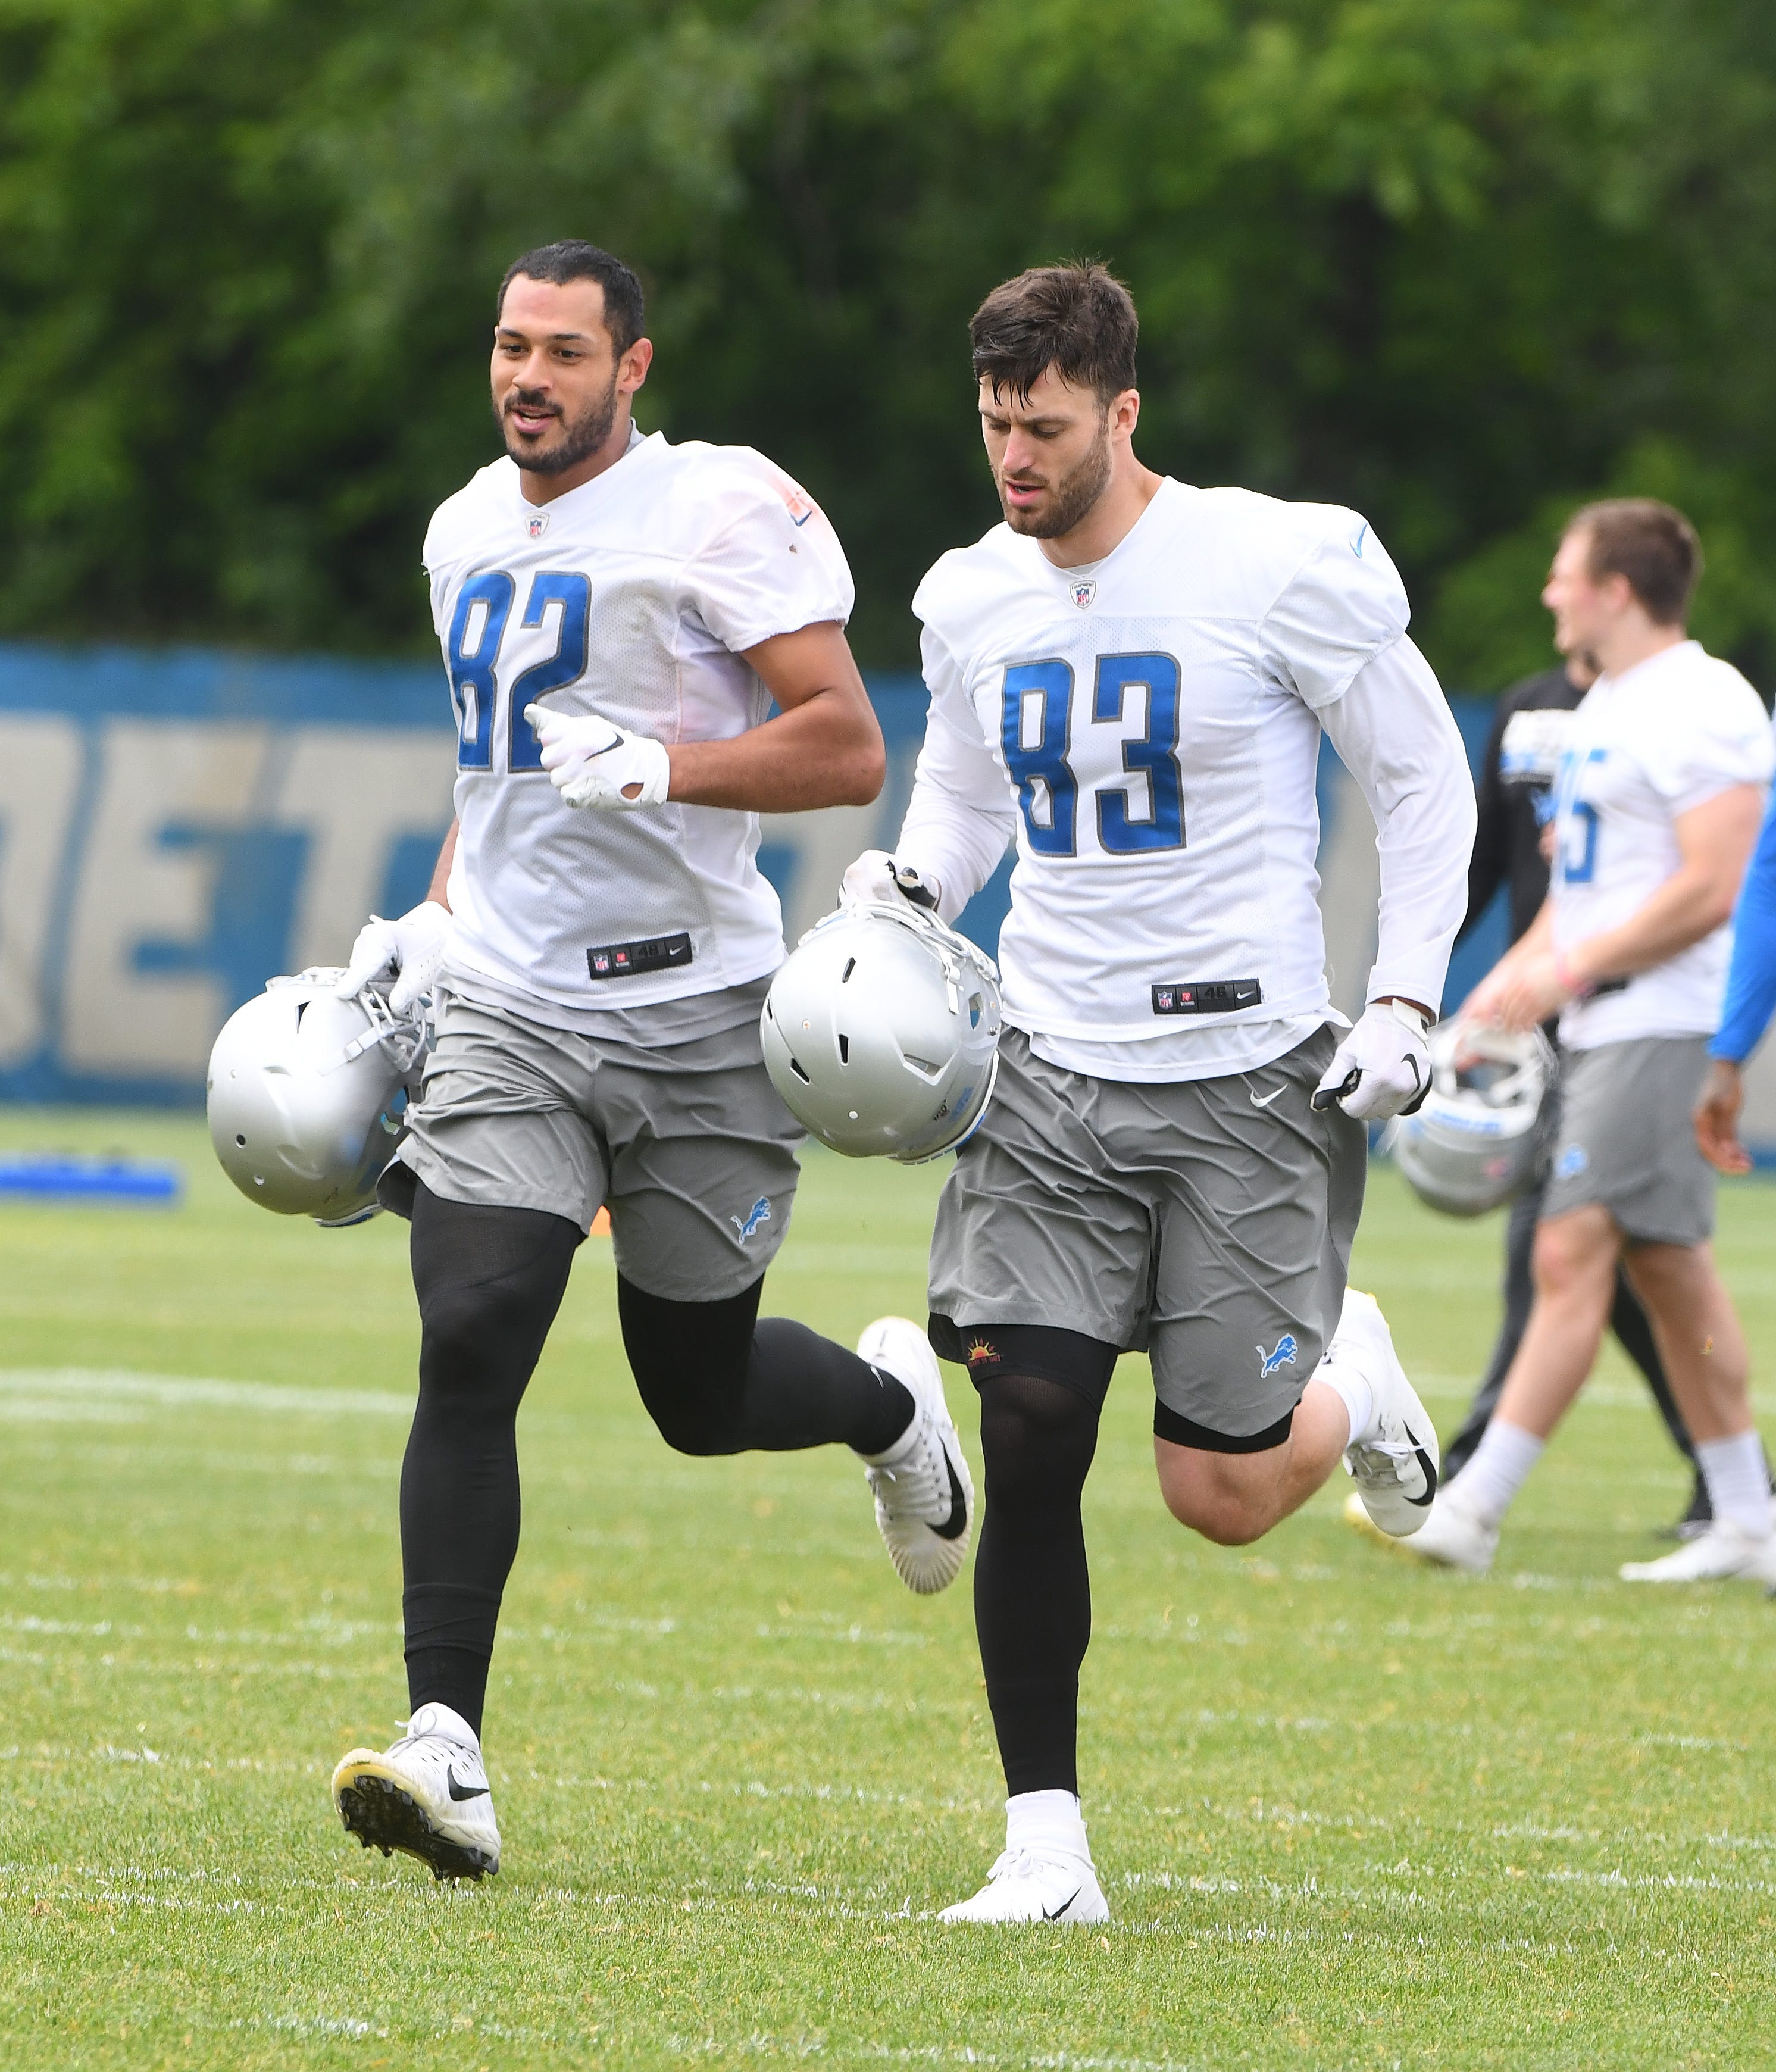 Lions tight ends Logan Thomas and Jesse James run off the field at the end of practice.